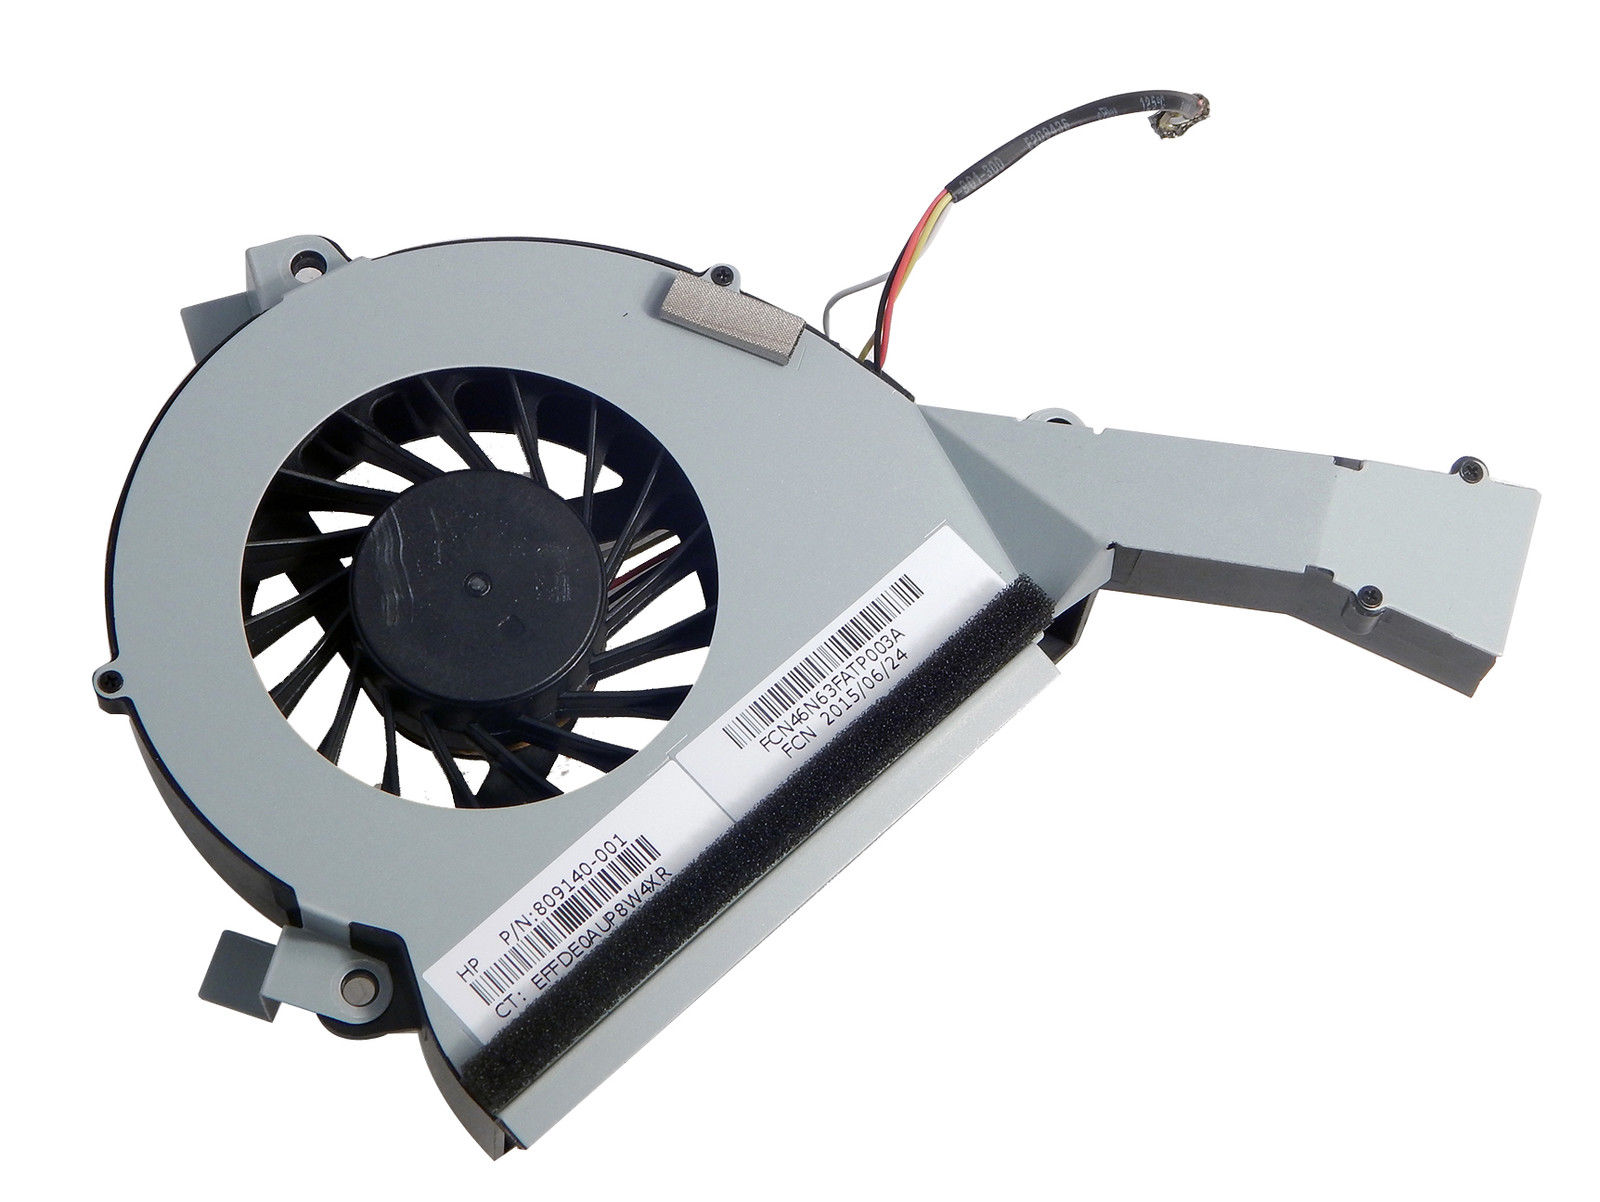 NEW HP 809140-001 Pavilion AiO ID15 35W System Fan - Click Image to Close